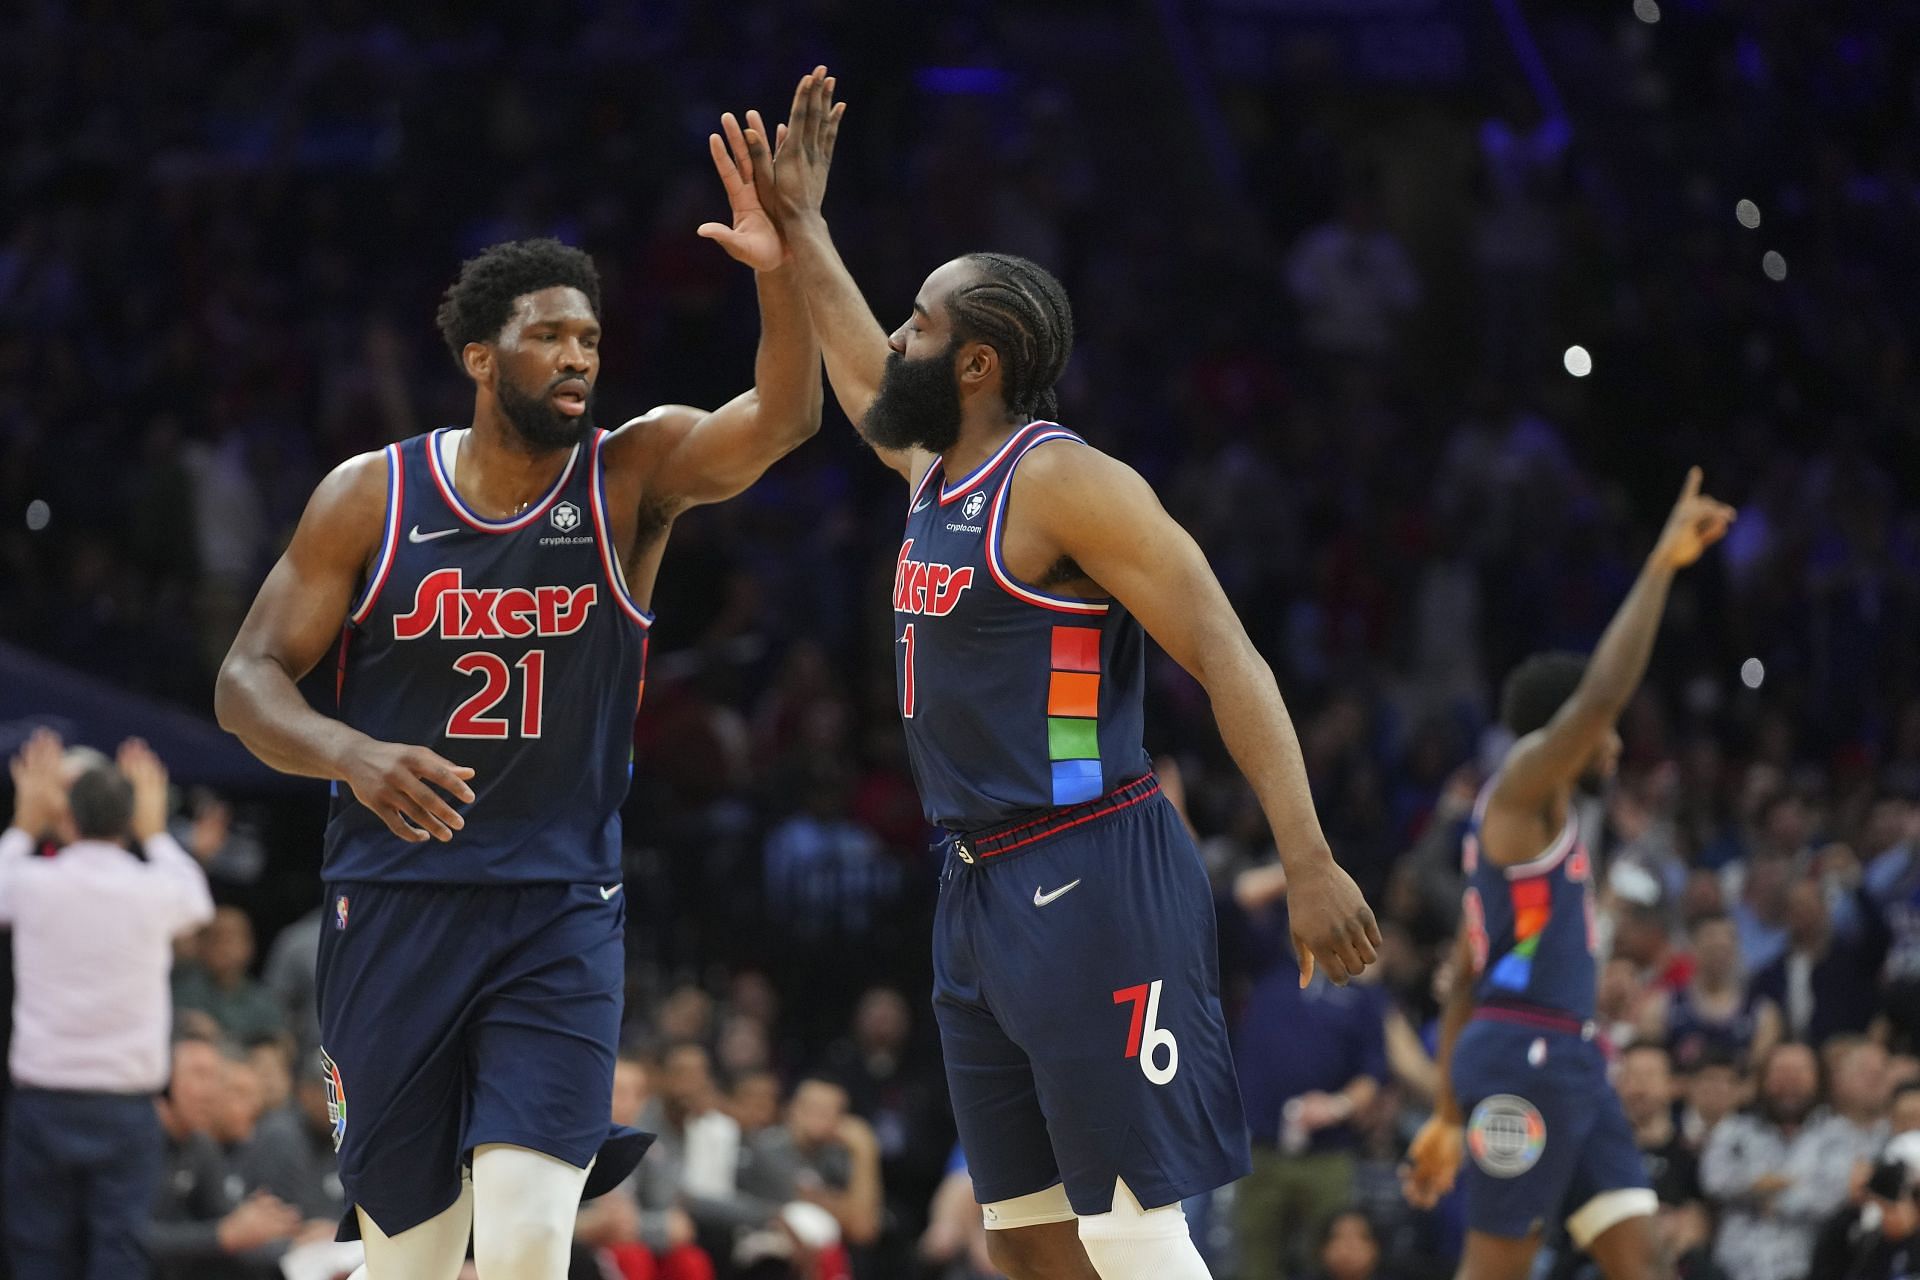 James Harden and Joel Embiid will be hoping to lead the Philadelphia 76ers to an NBA championship this season